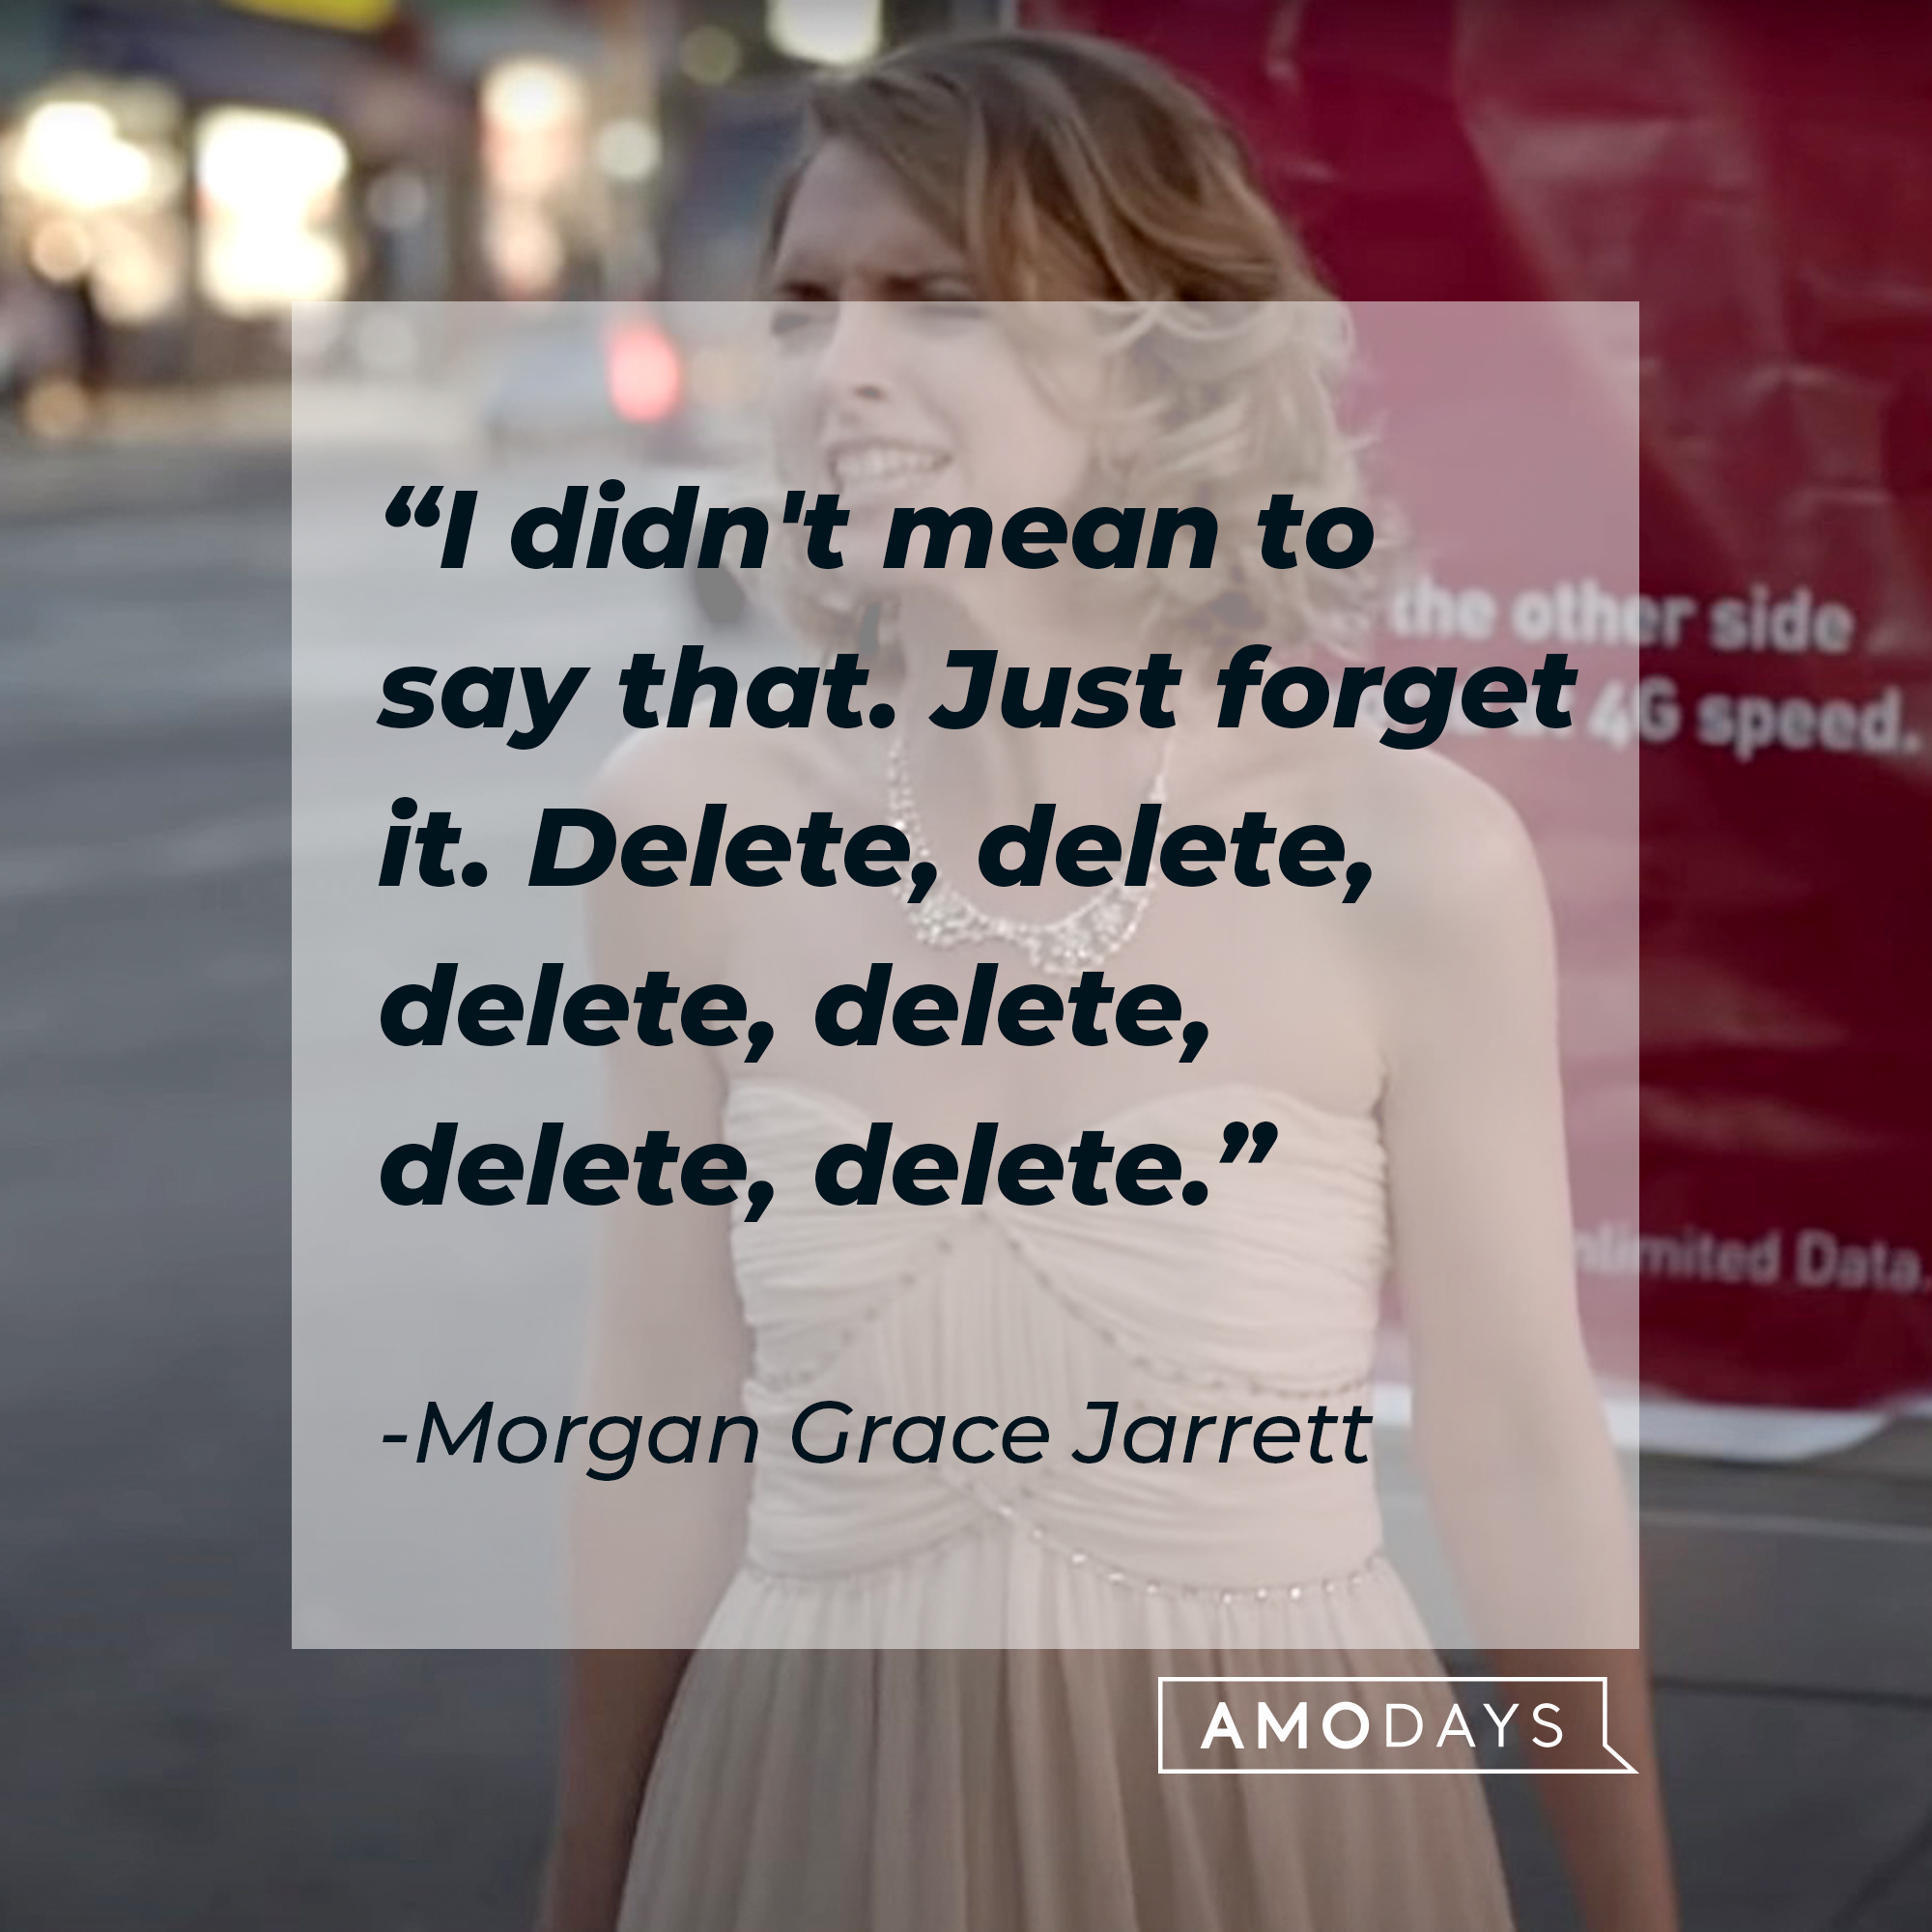 An image of Morgan Grace Jarrett with her quote, “I didn't mean to say that. Just forget it. Delete, delete, delete, delete, delete, delete.” | Source: youtube.com/ComedyCentral